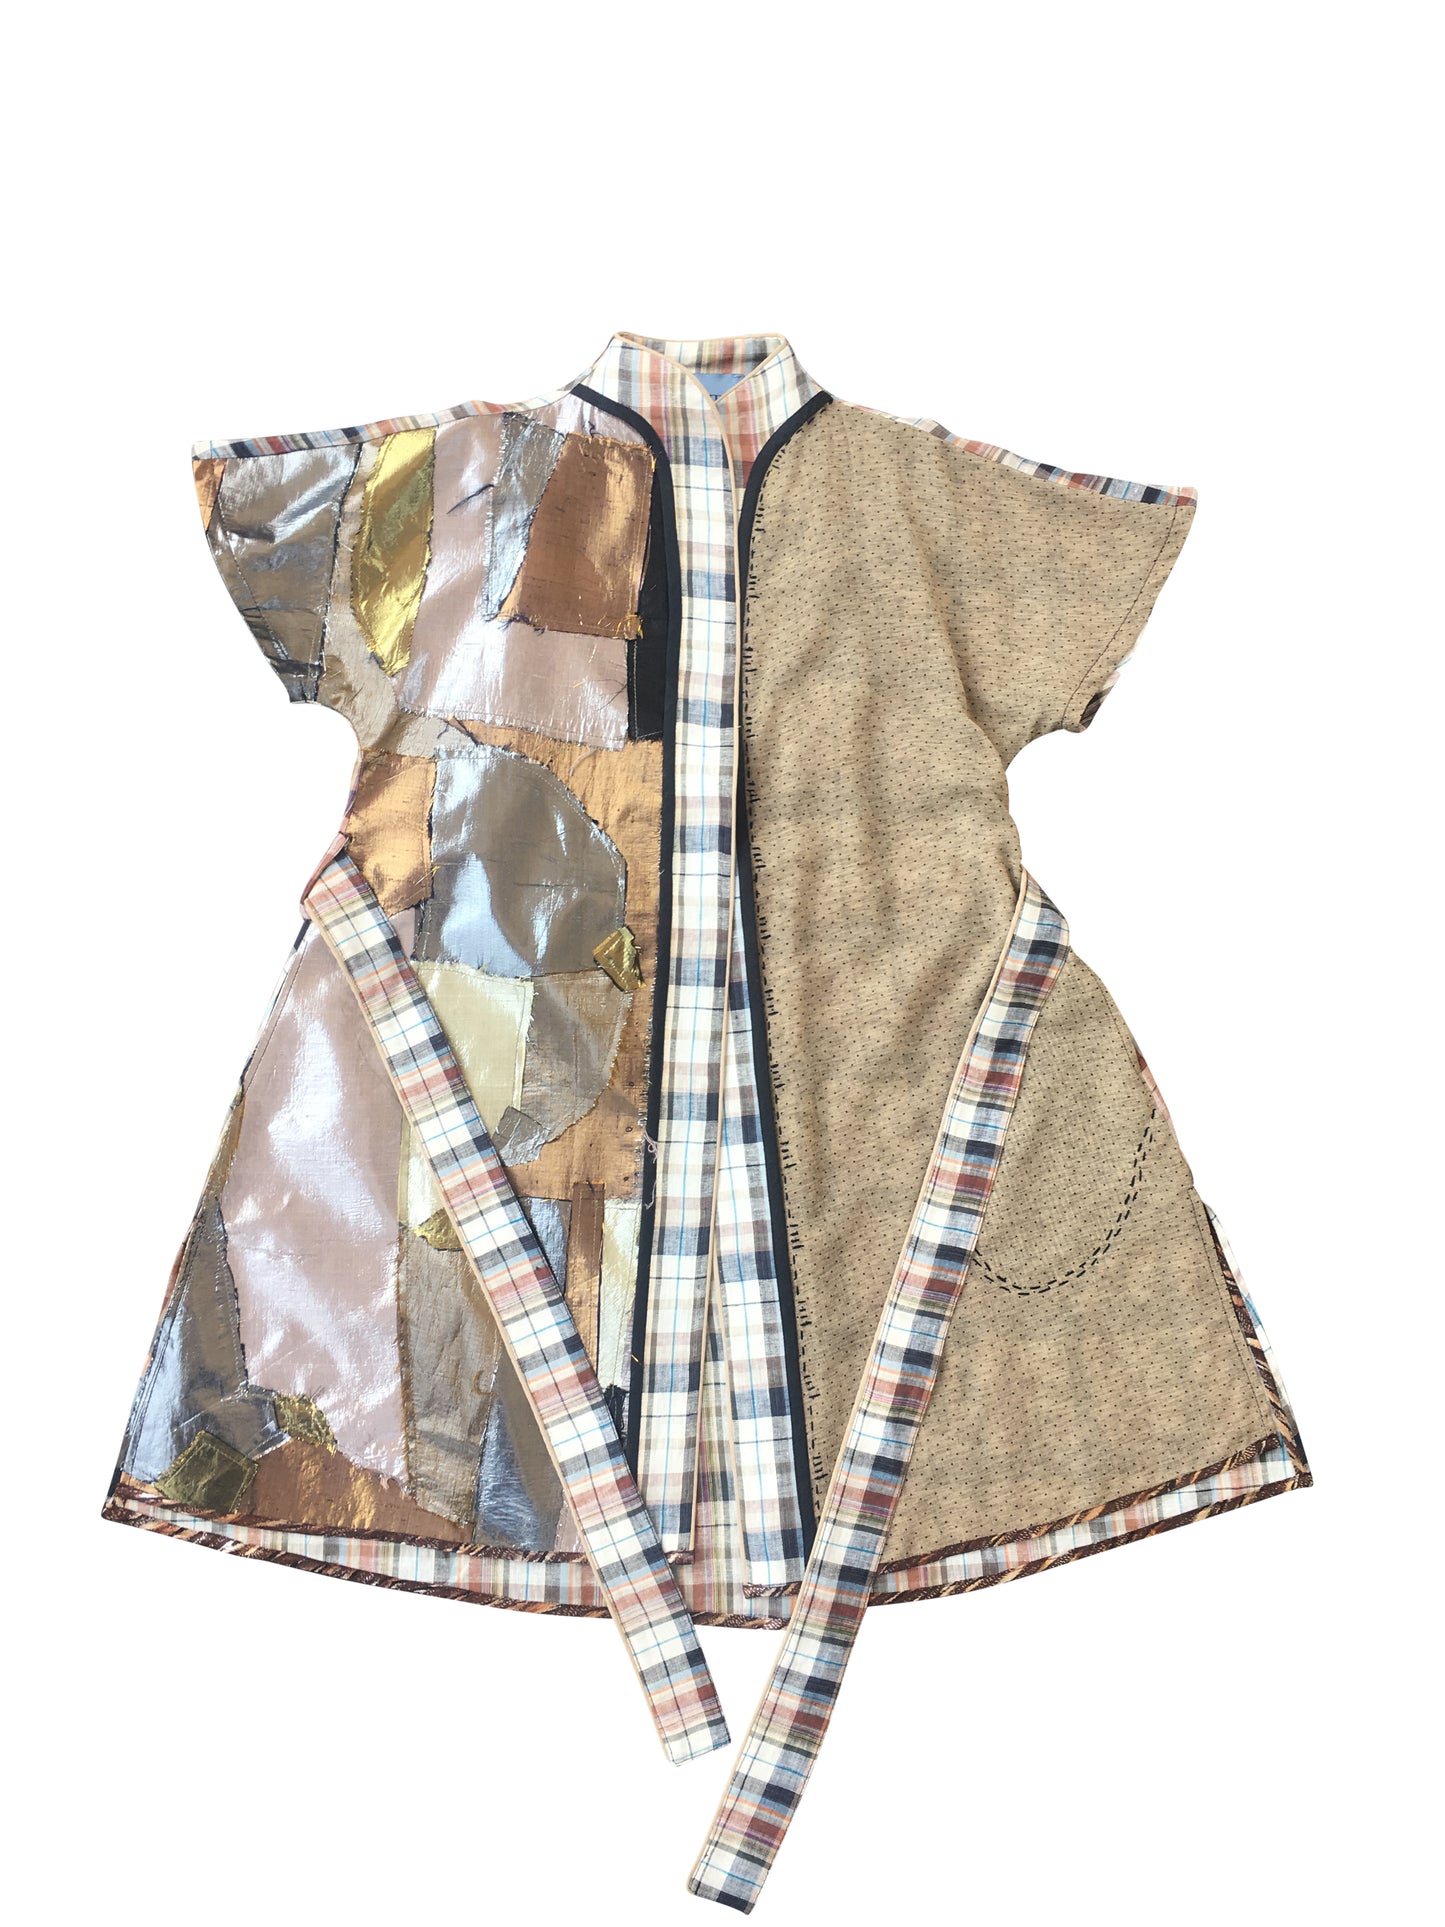 Fragmented Artisanal Abstract Wrap dress